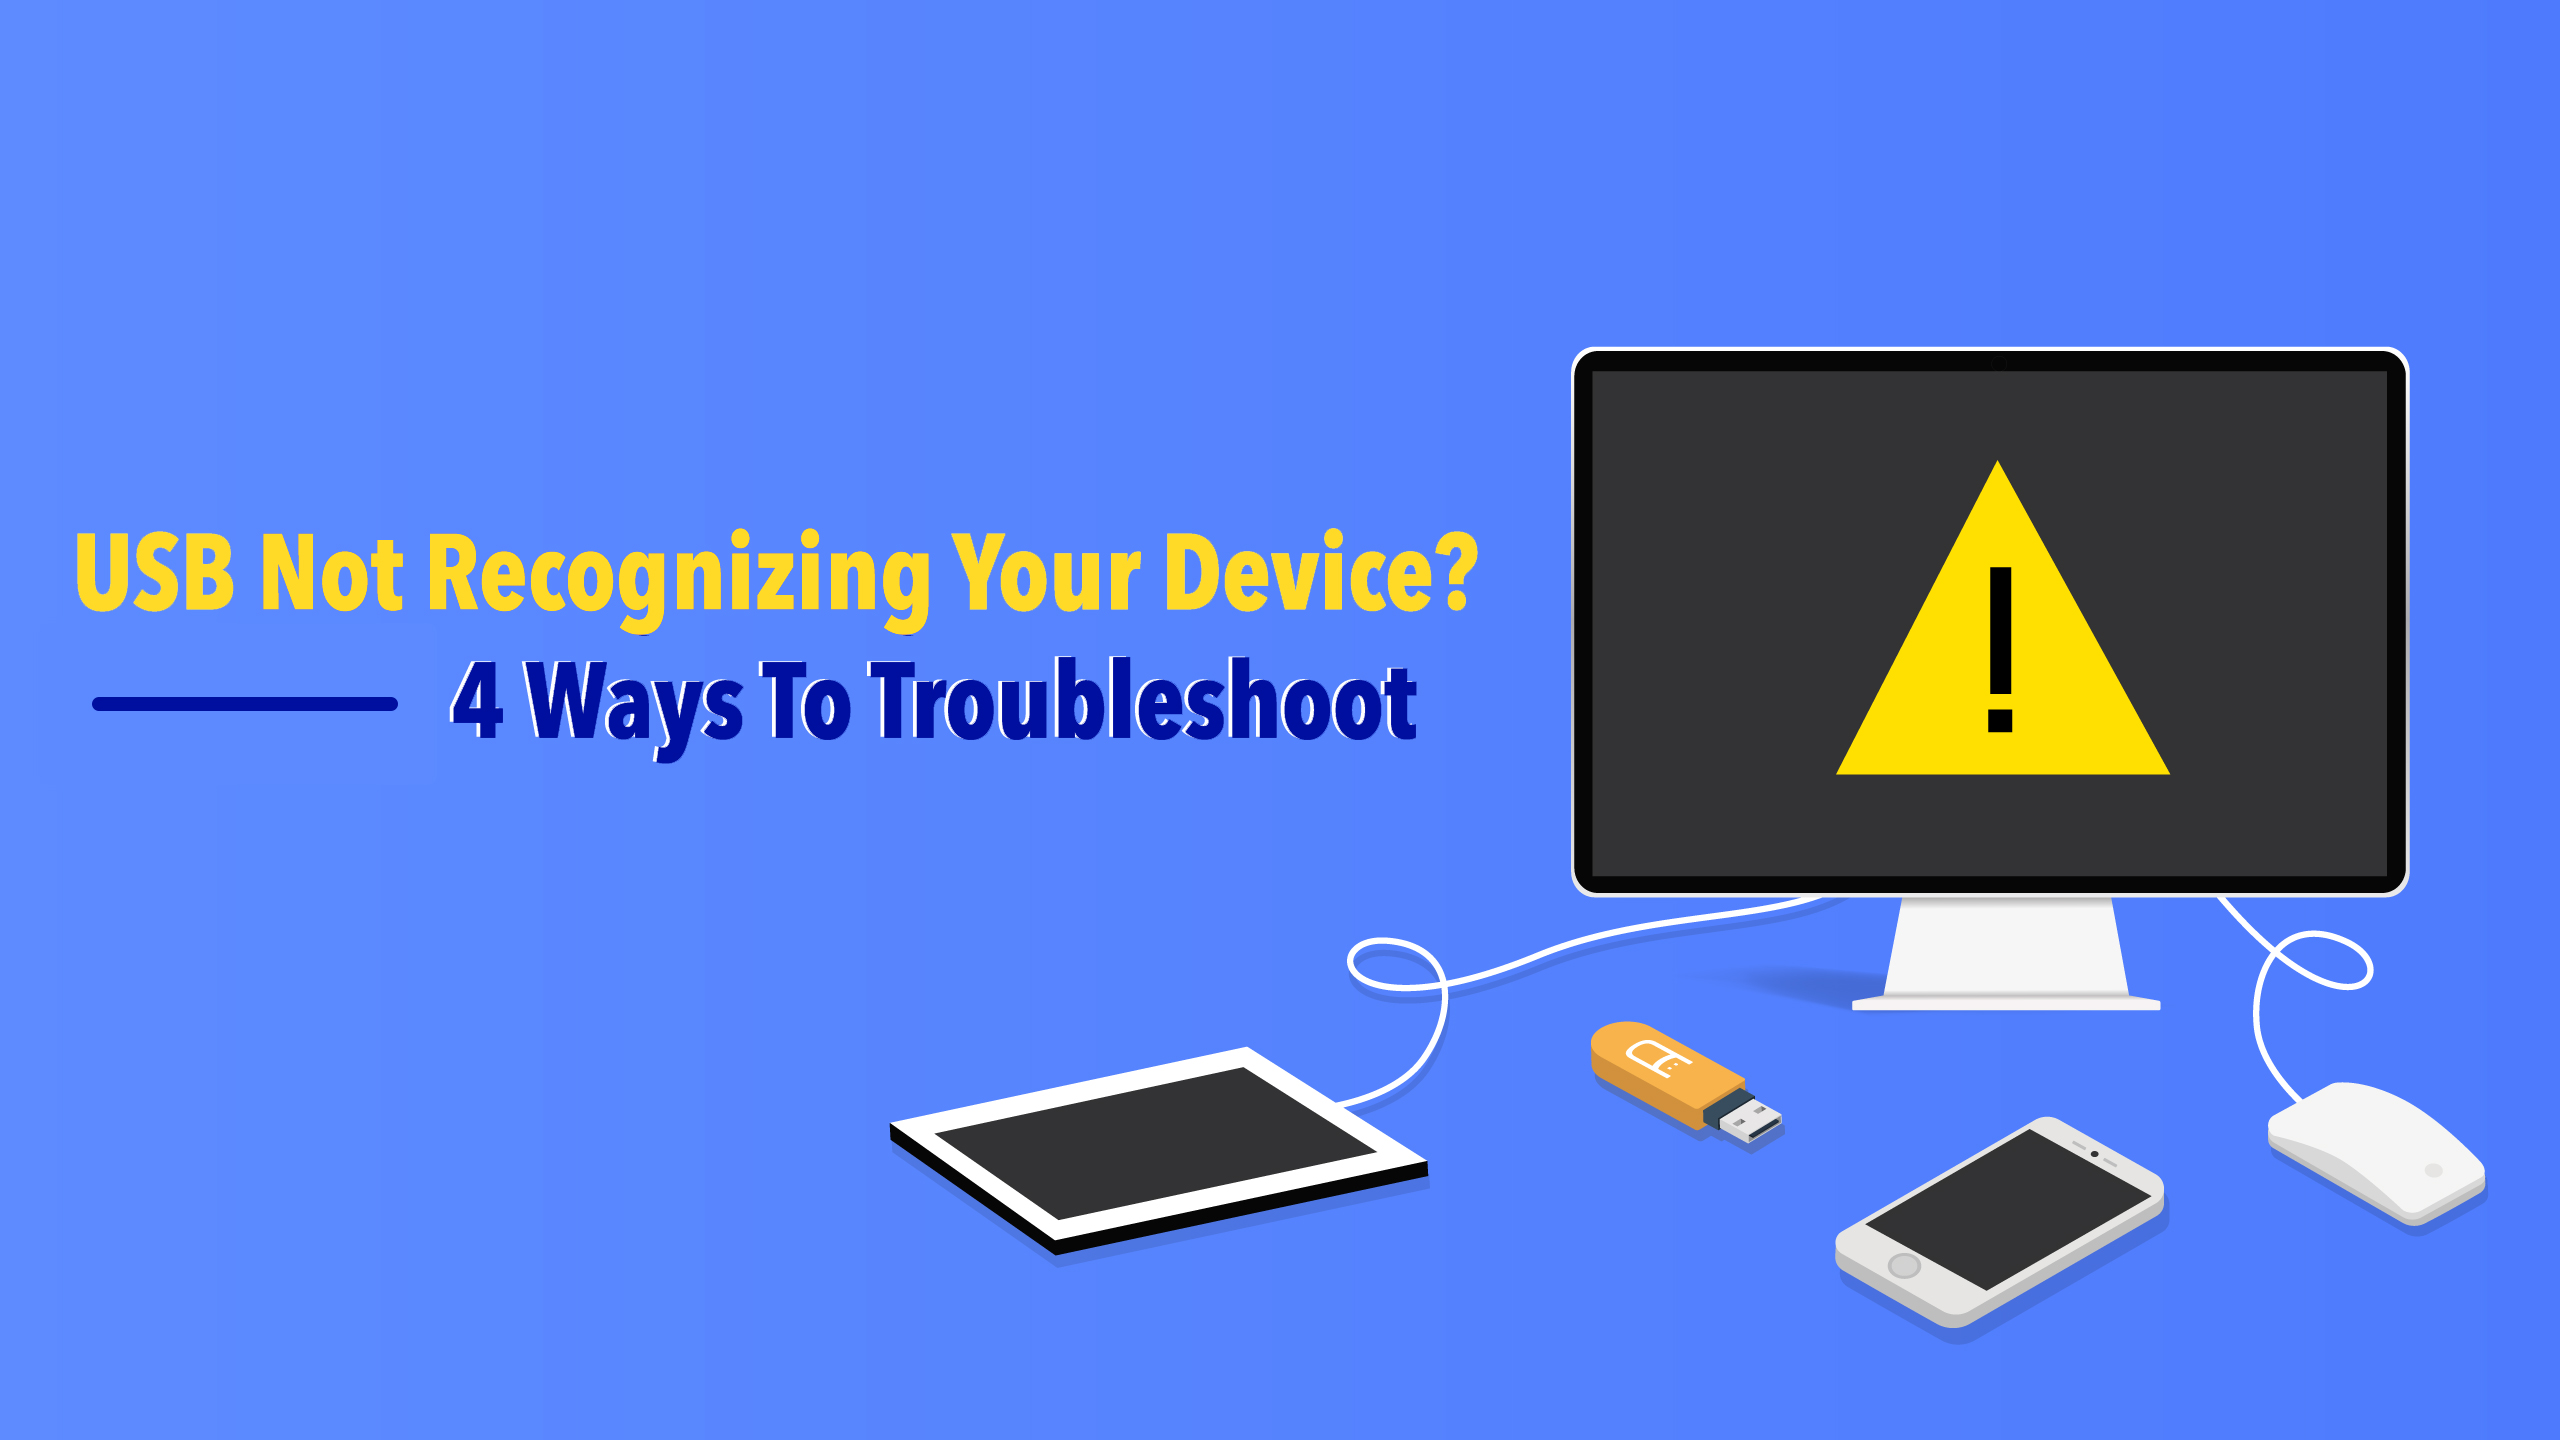 Try plugging the USB device into a different USB port on your computer.
If possible, test the USB device on another computer to ensure it is functioning correctly.